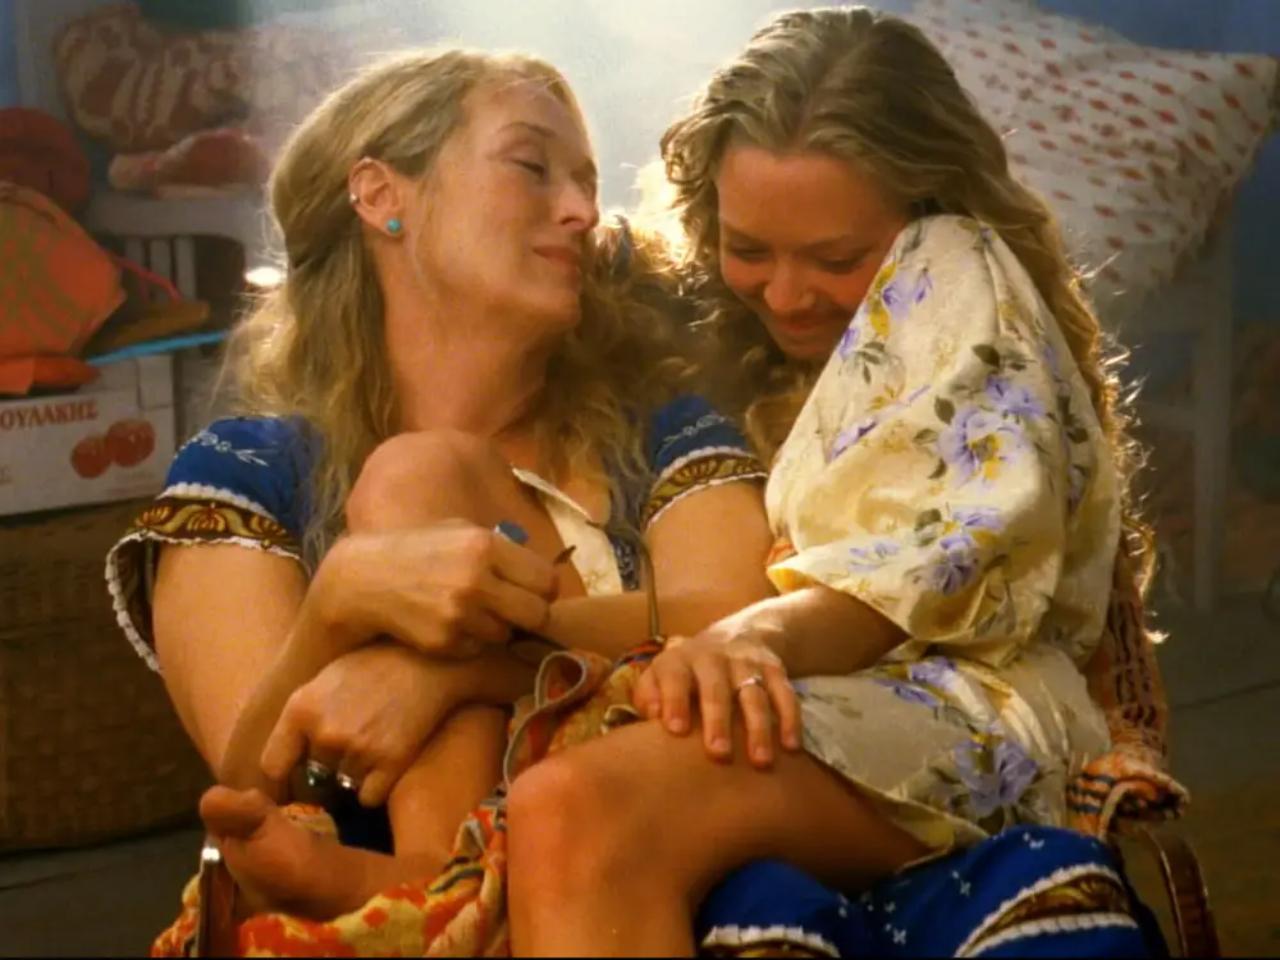 The relationship between Sophie and Donna Sheridan is a central element that gives the story its emotional core. Despite their generational differences, they share a deep, loving bond that transcends the traditional mother-daughter dynamic and extends into the realm of friendship. Donna, a spirited single mother, has raised Sophie on her own on a Greek island. Donna's guidance plays a crucial role in her life decisions, as seen in the storyline where Sophie seeks her mother's advice and support when planning her wedding